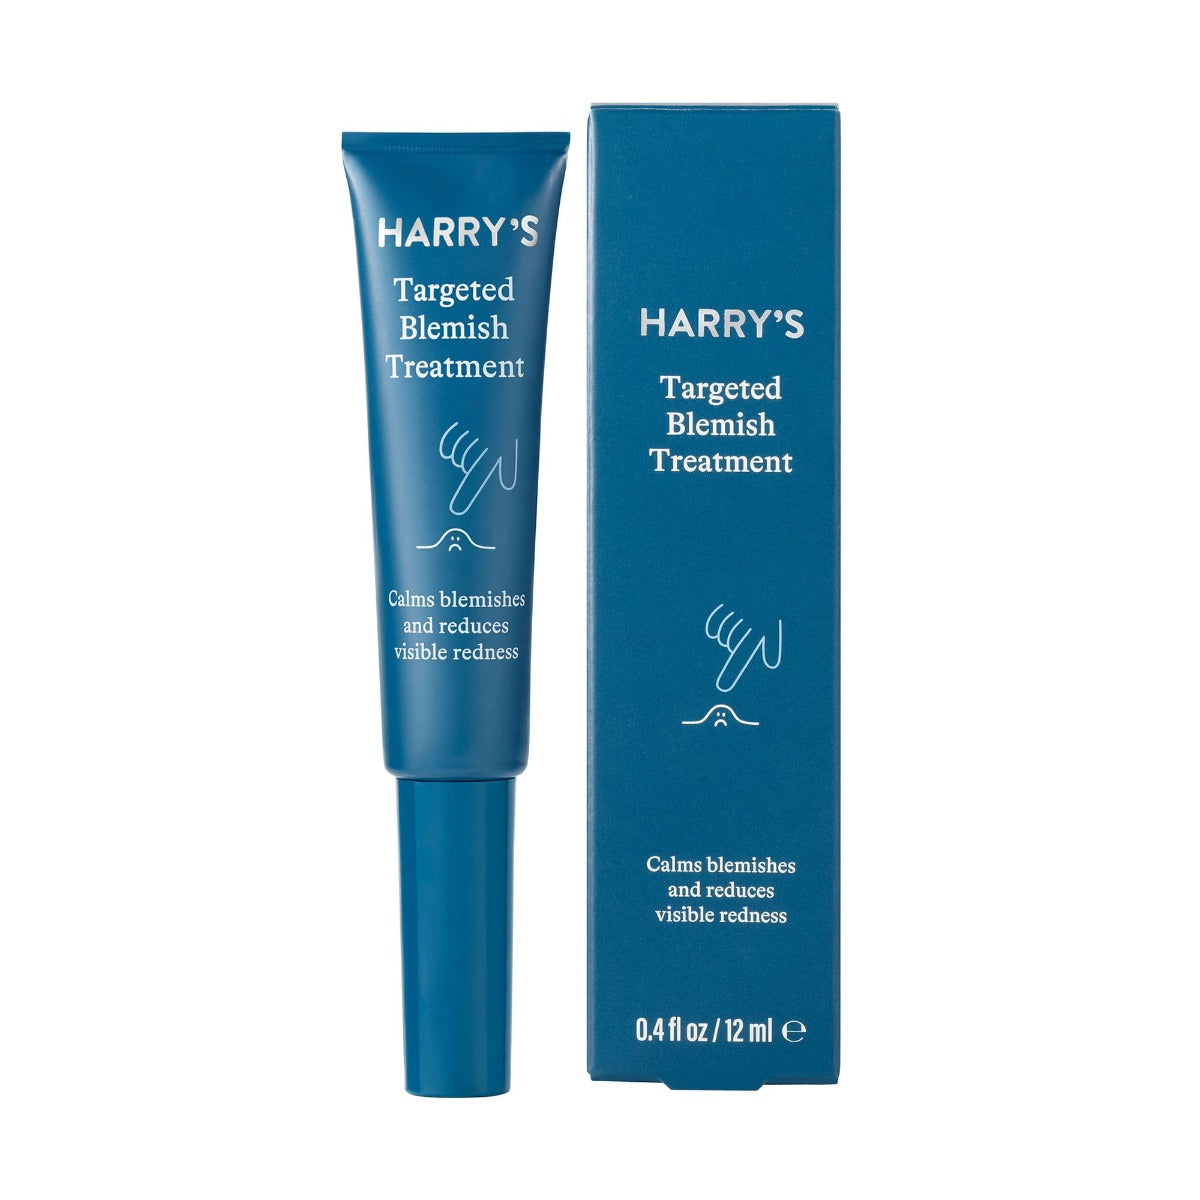 Harry's Targeted Blemish Treatment